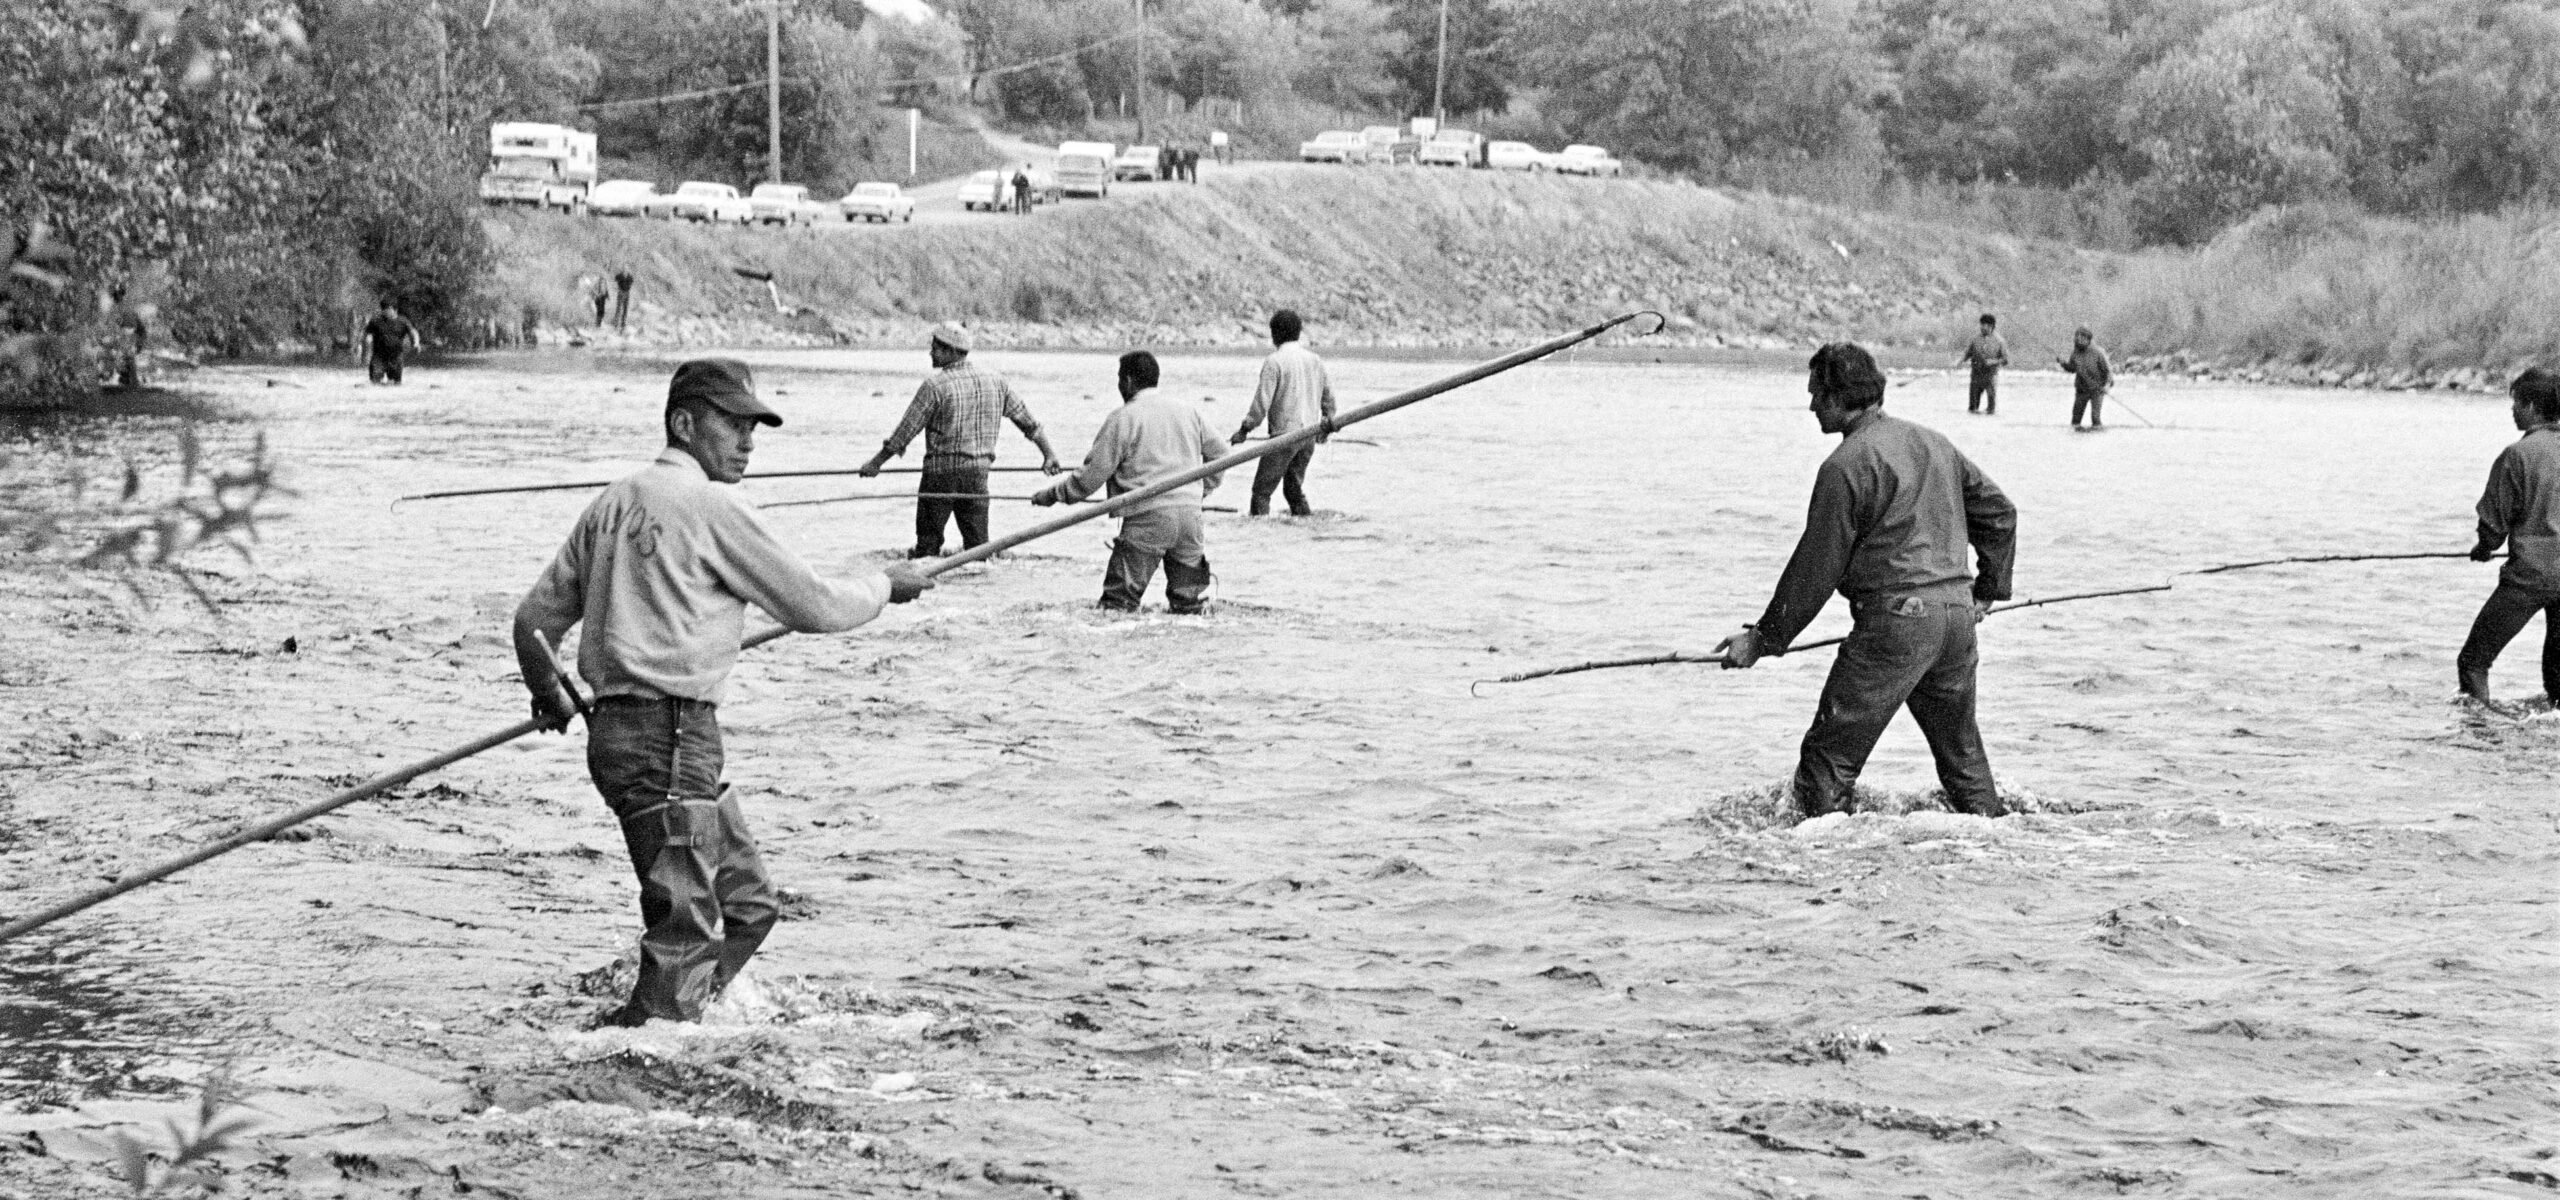 Native American men river fishing wit spears.